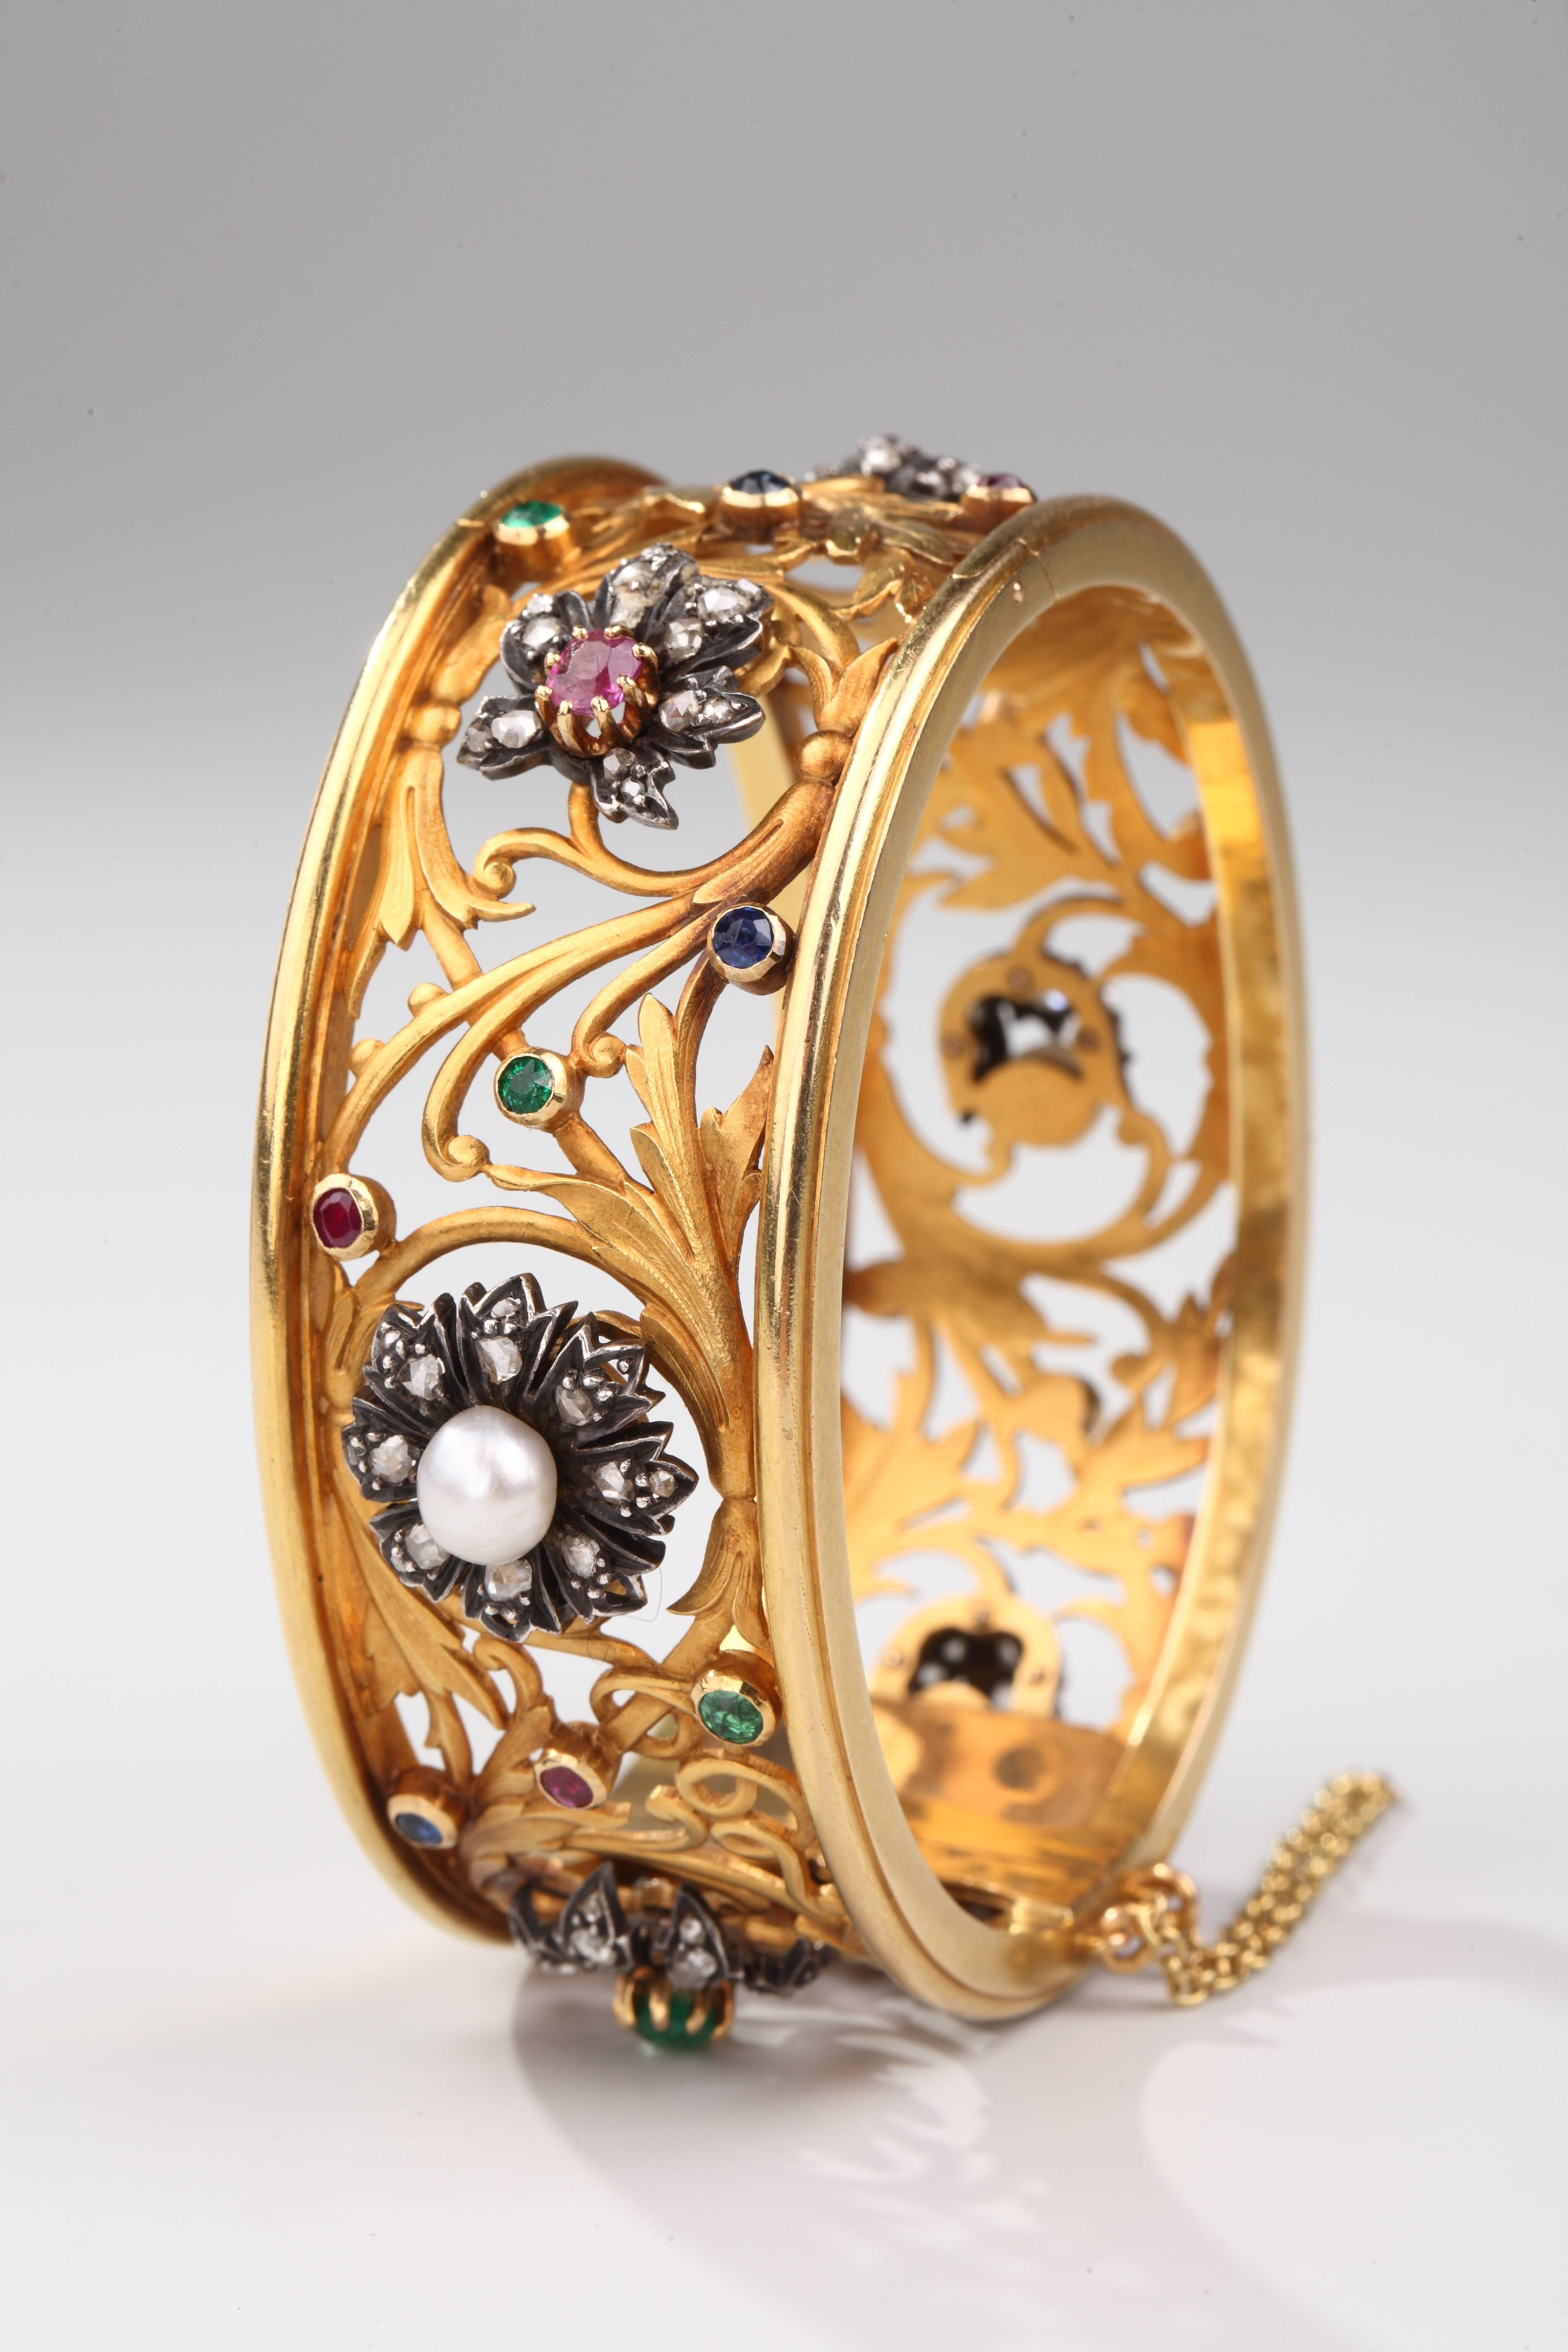 Magnificent cuff bracelet in 18k yellow gold adorned with a delicate frieze of foliage in chiseled gold set with rose cut diamonds, emeralds, rubies, sapphires and pearls.
French assay marks for gold.
